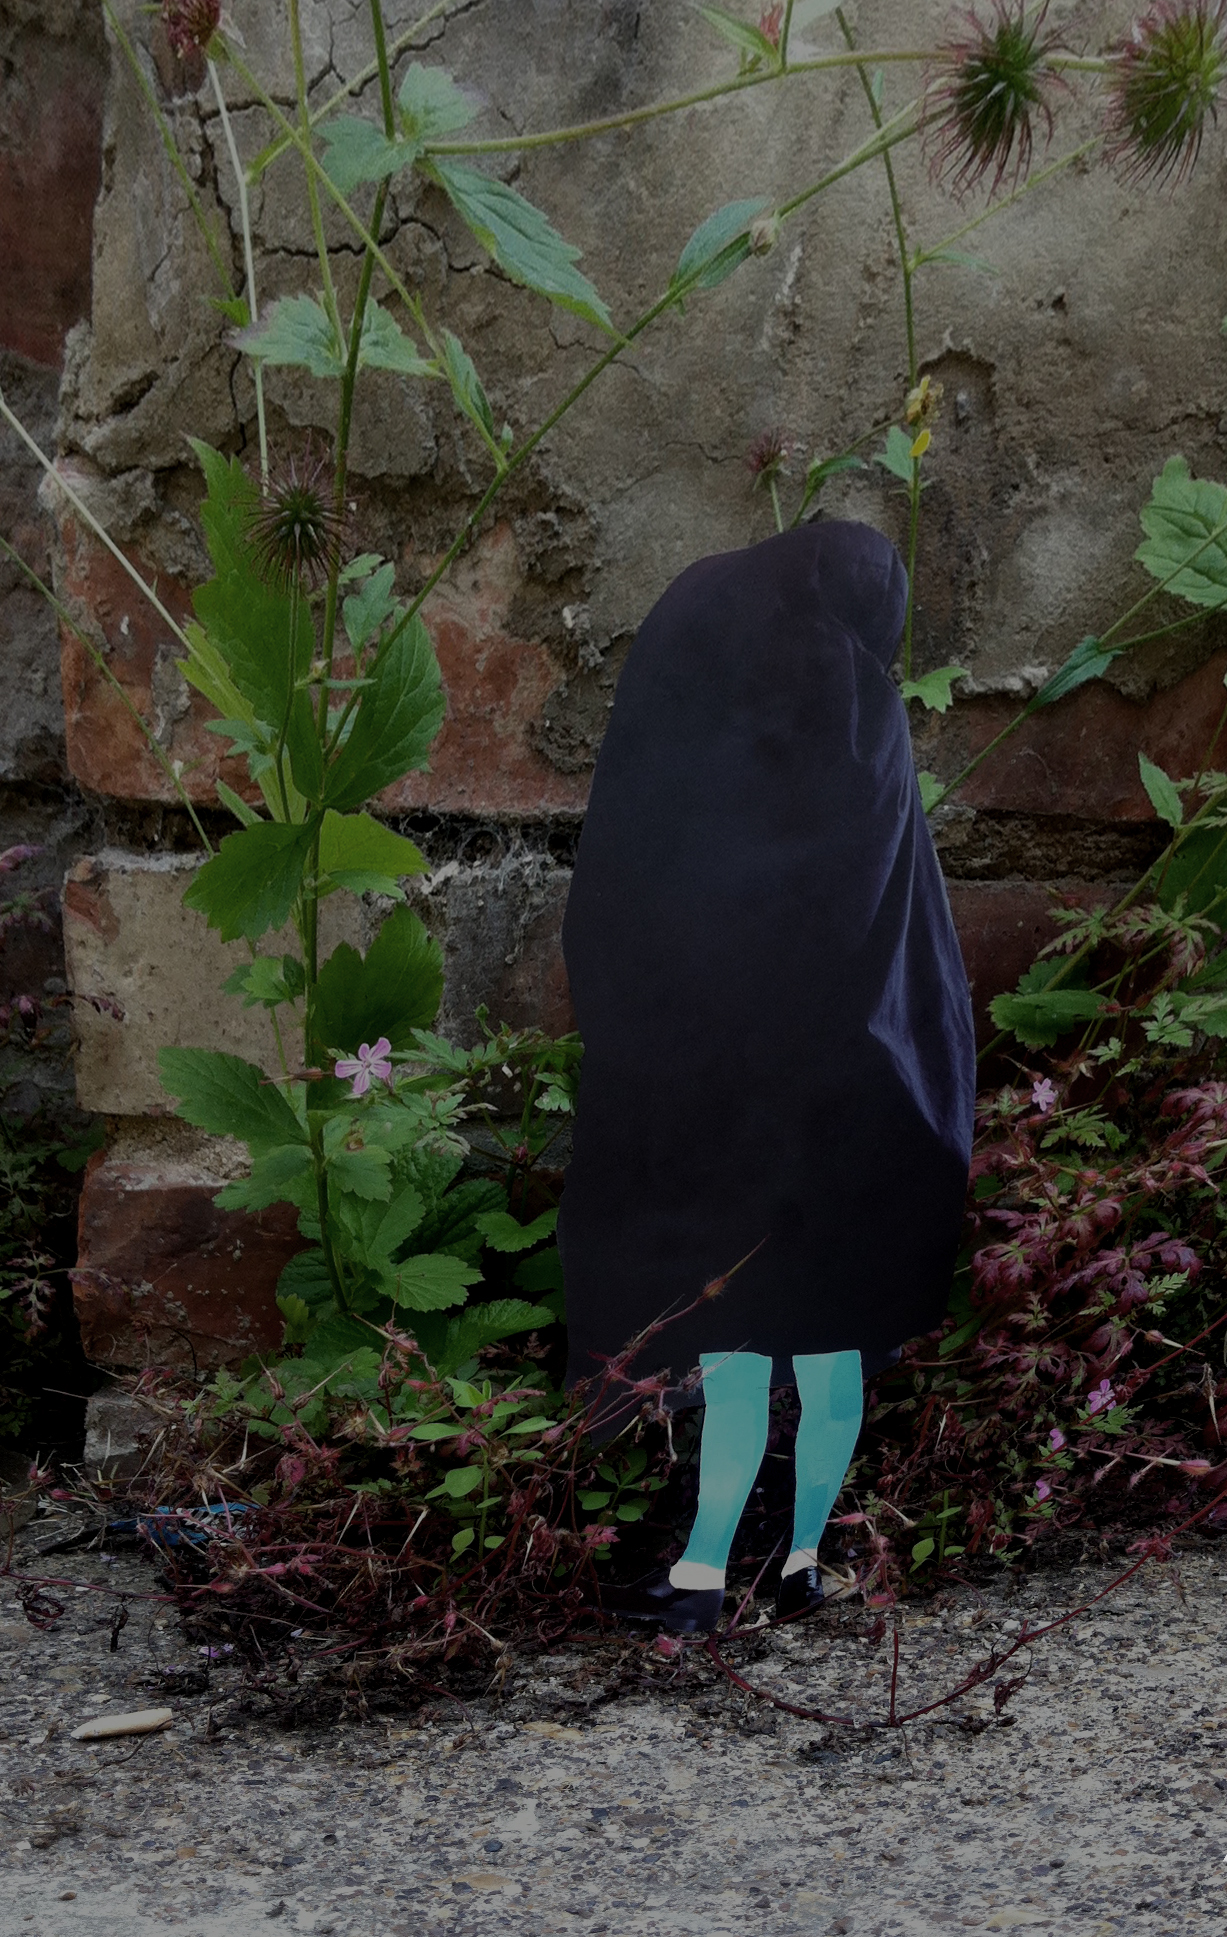 A walk in the woods: a blue-legged figure with a dark cloth over their head and body stands against a brick wall with plants growing round it